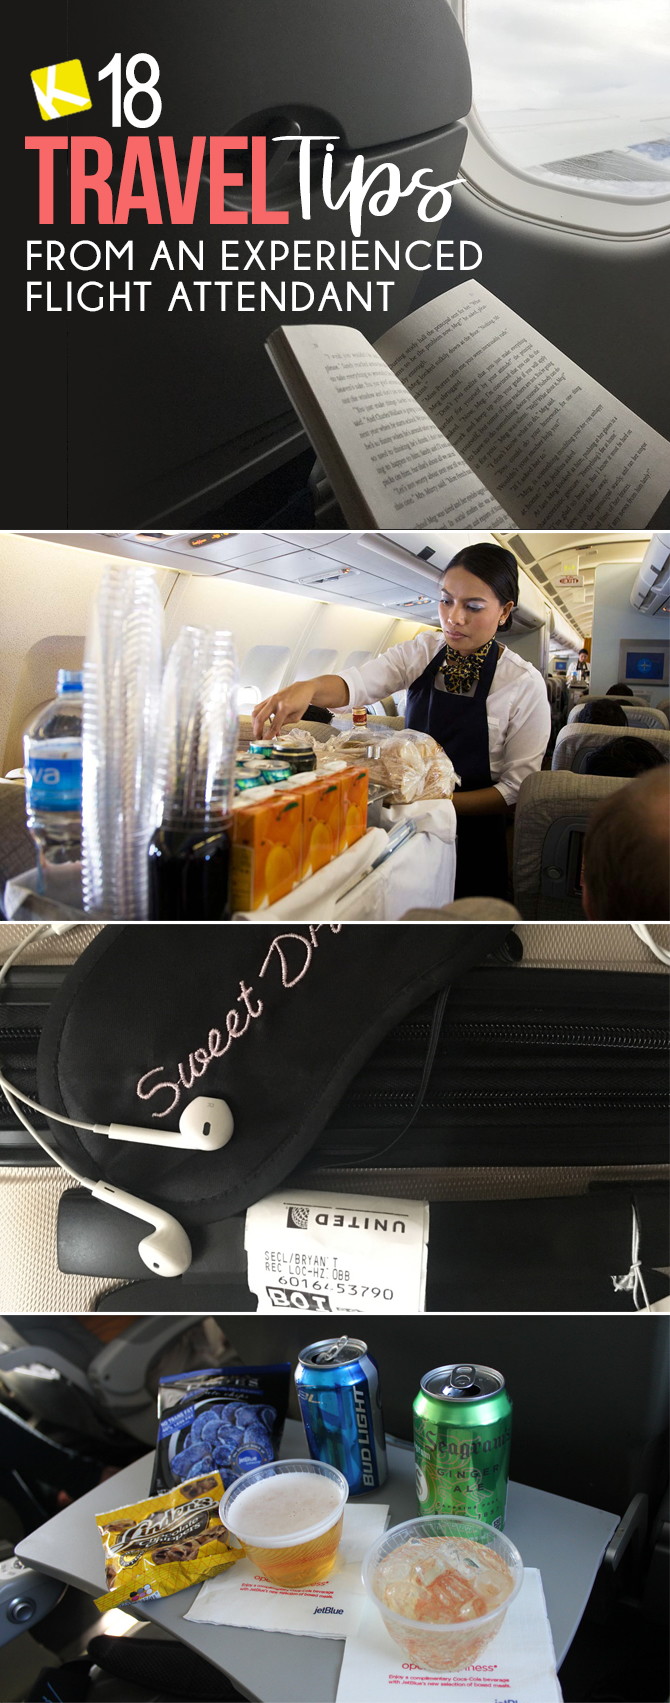 18 Travel Tips from an Experienced Flight Attendant - The